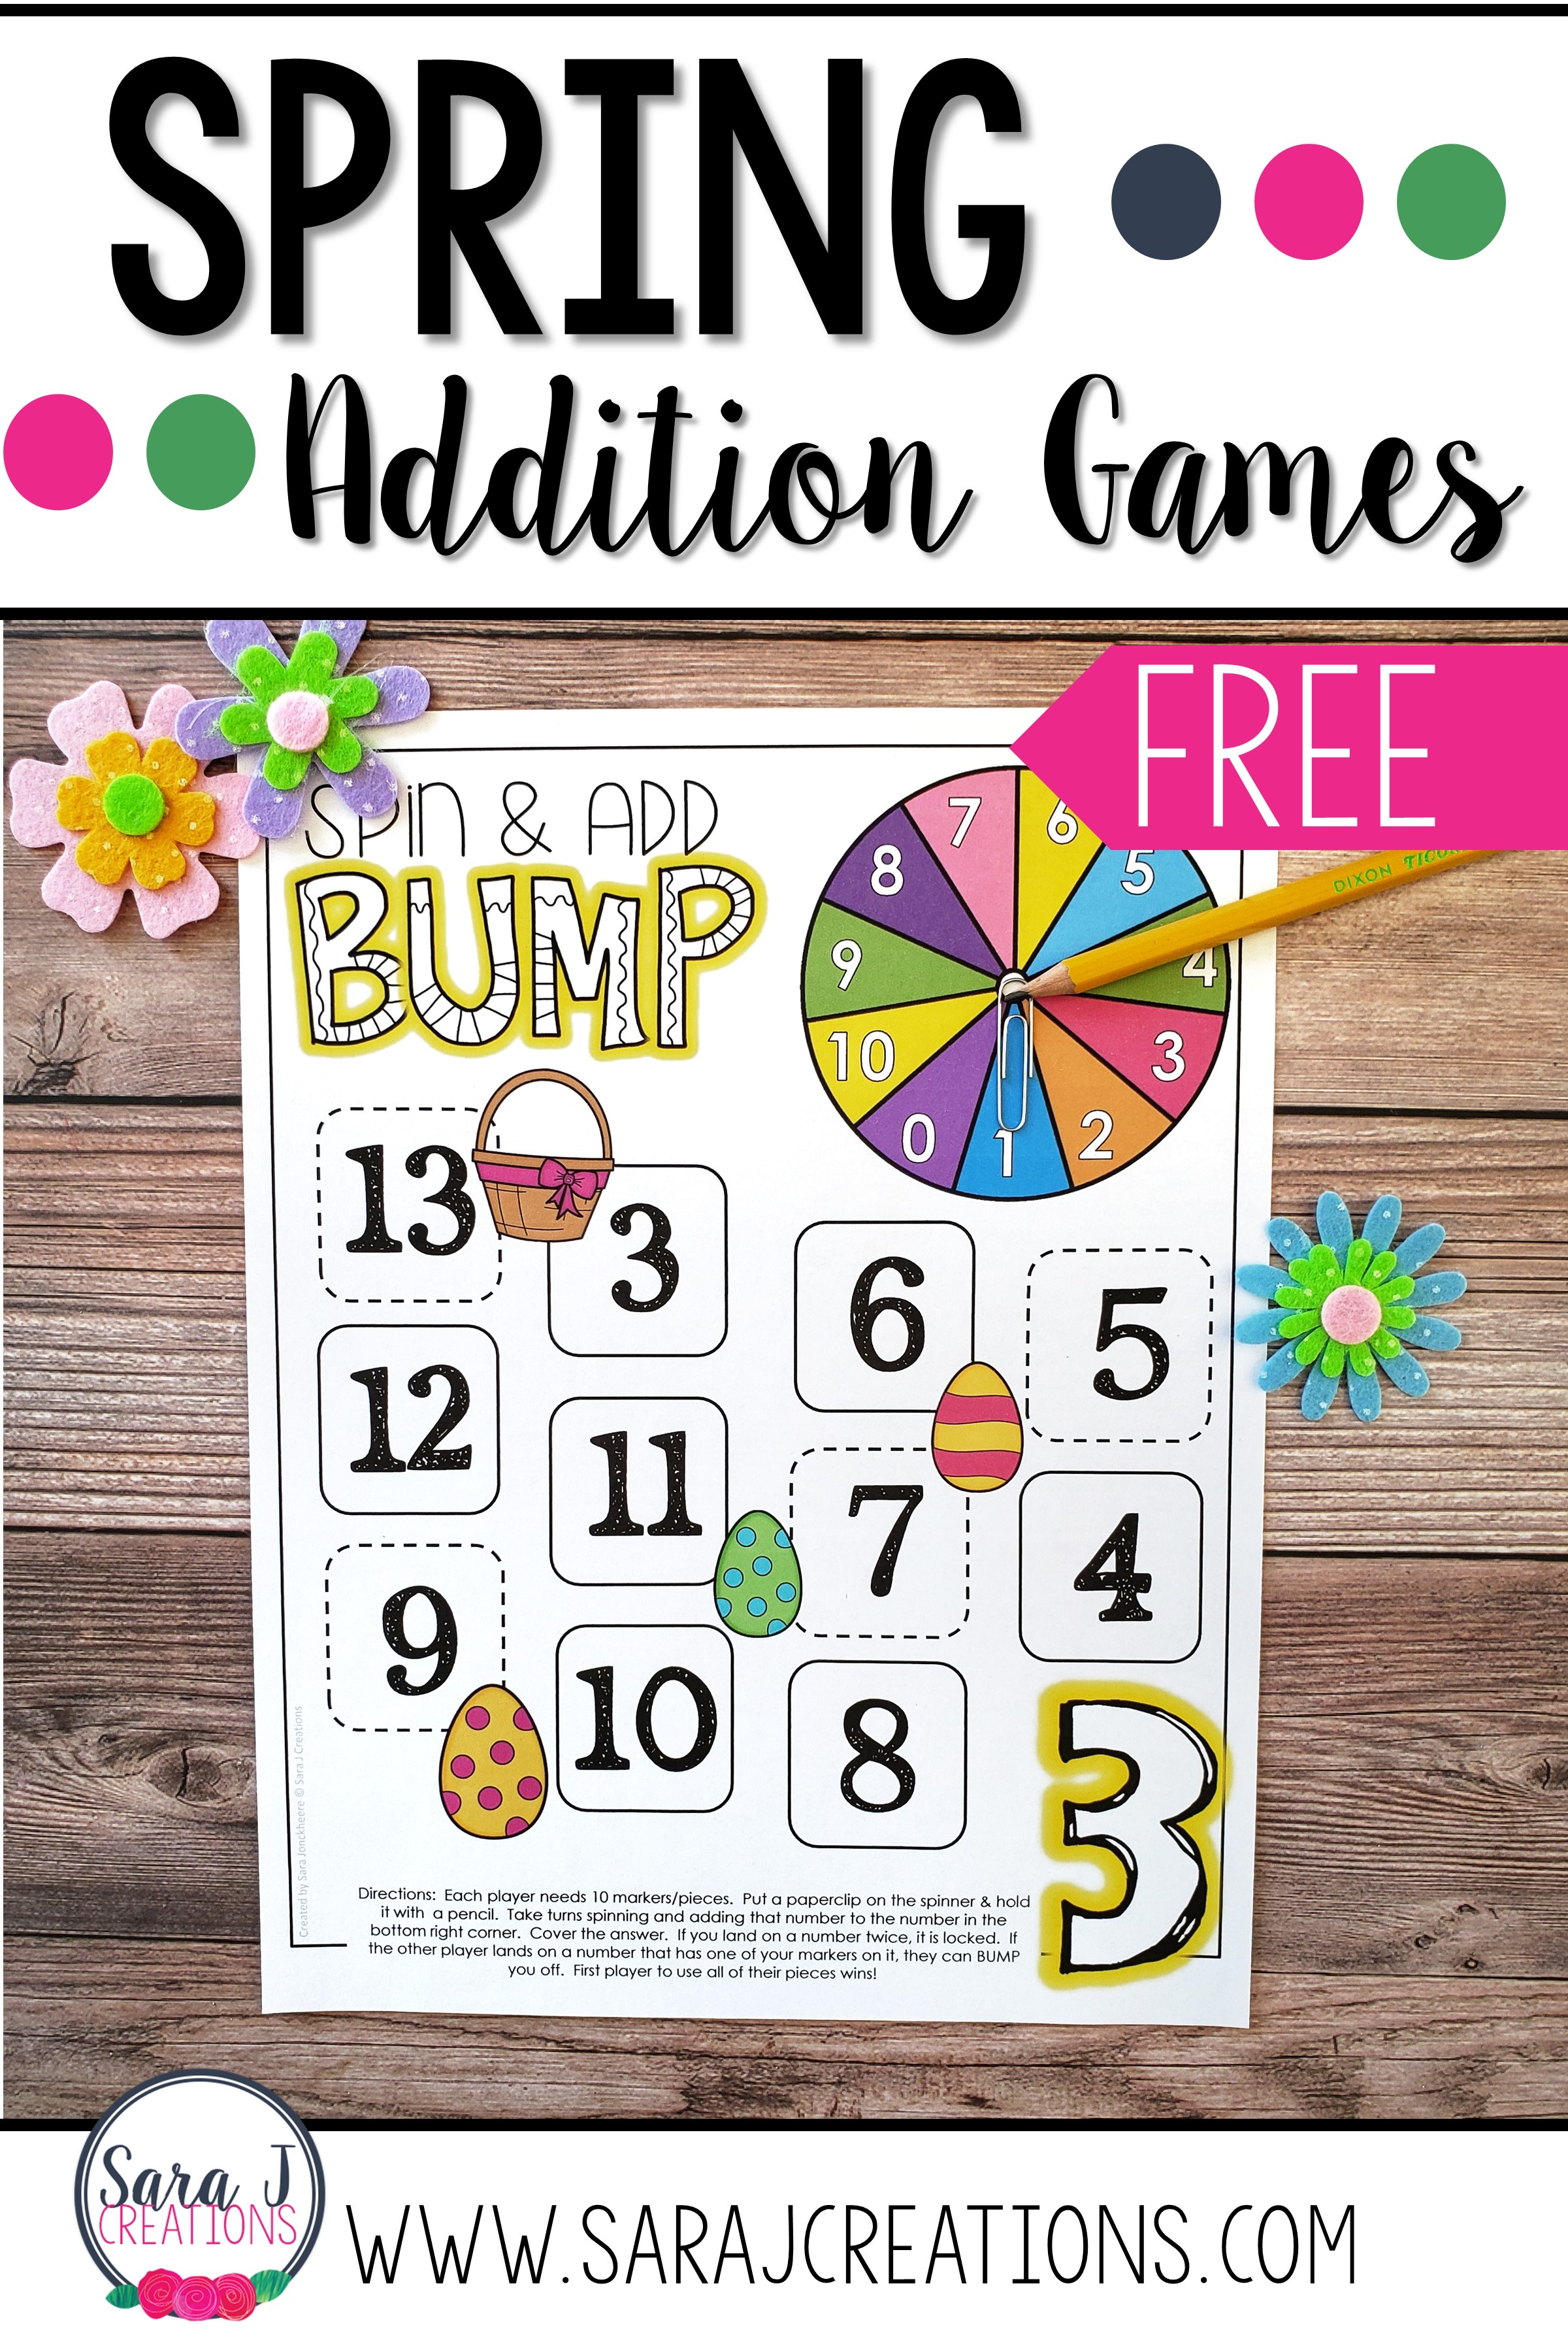 Free addition math game boards for practicing math fact fluency